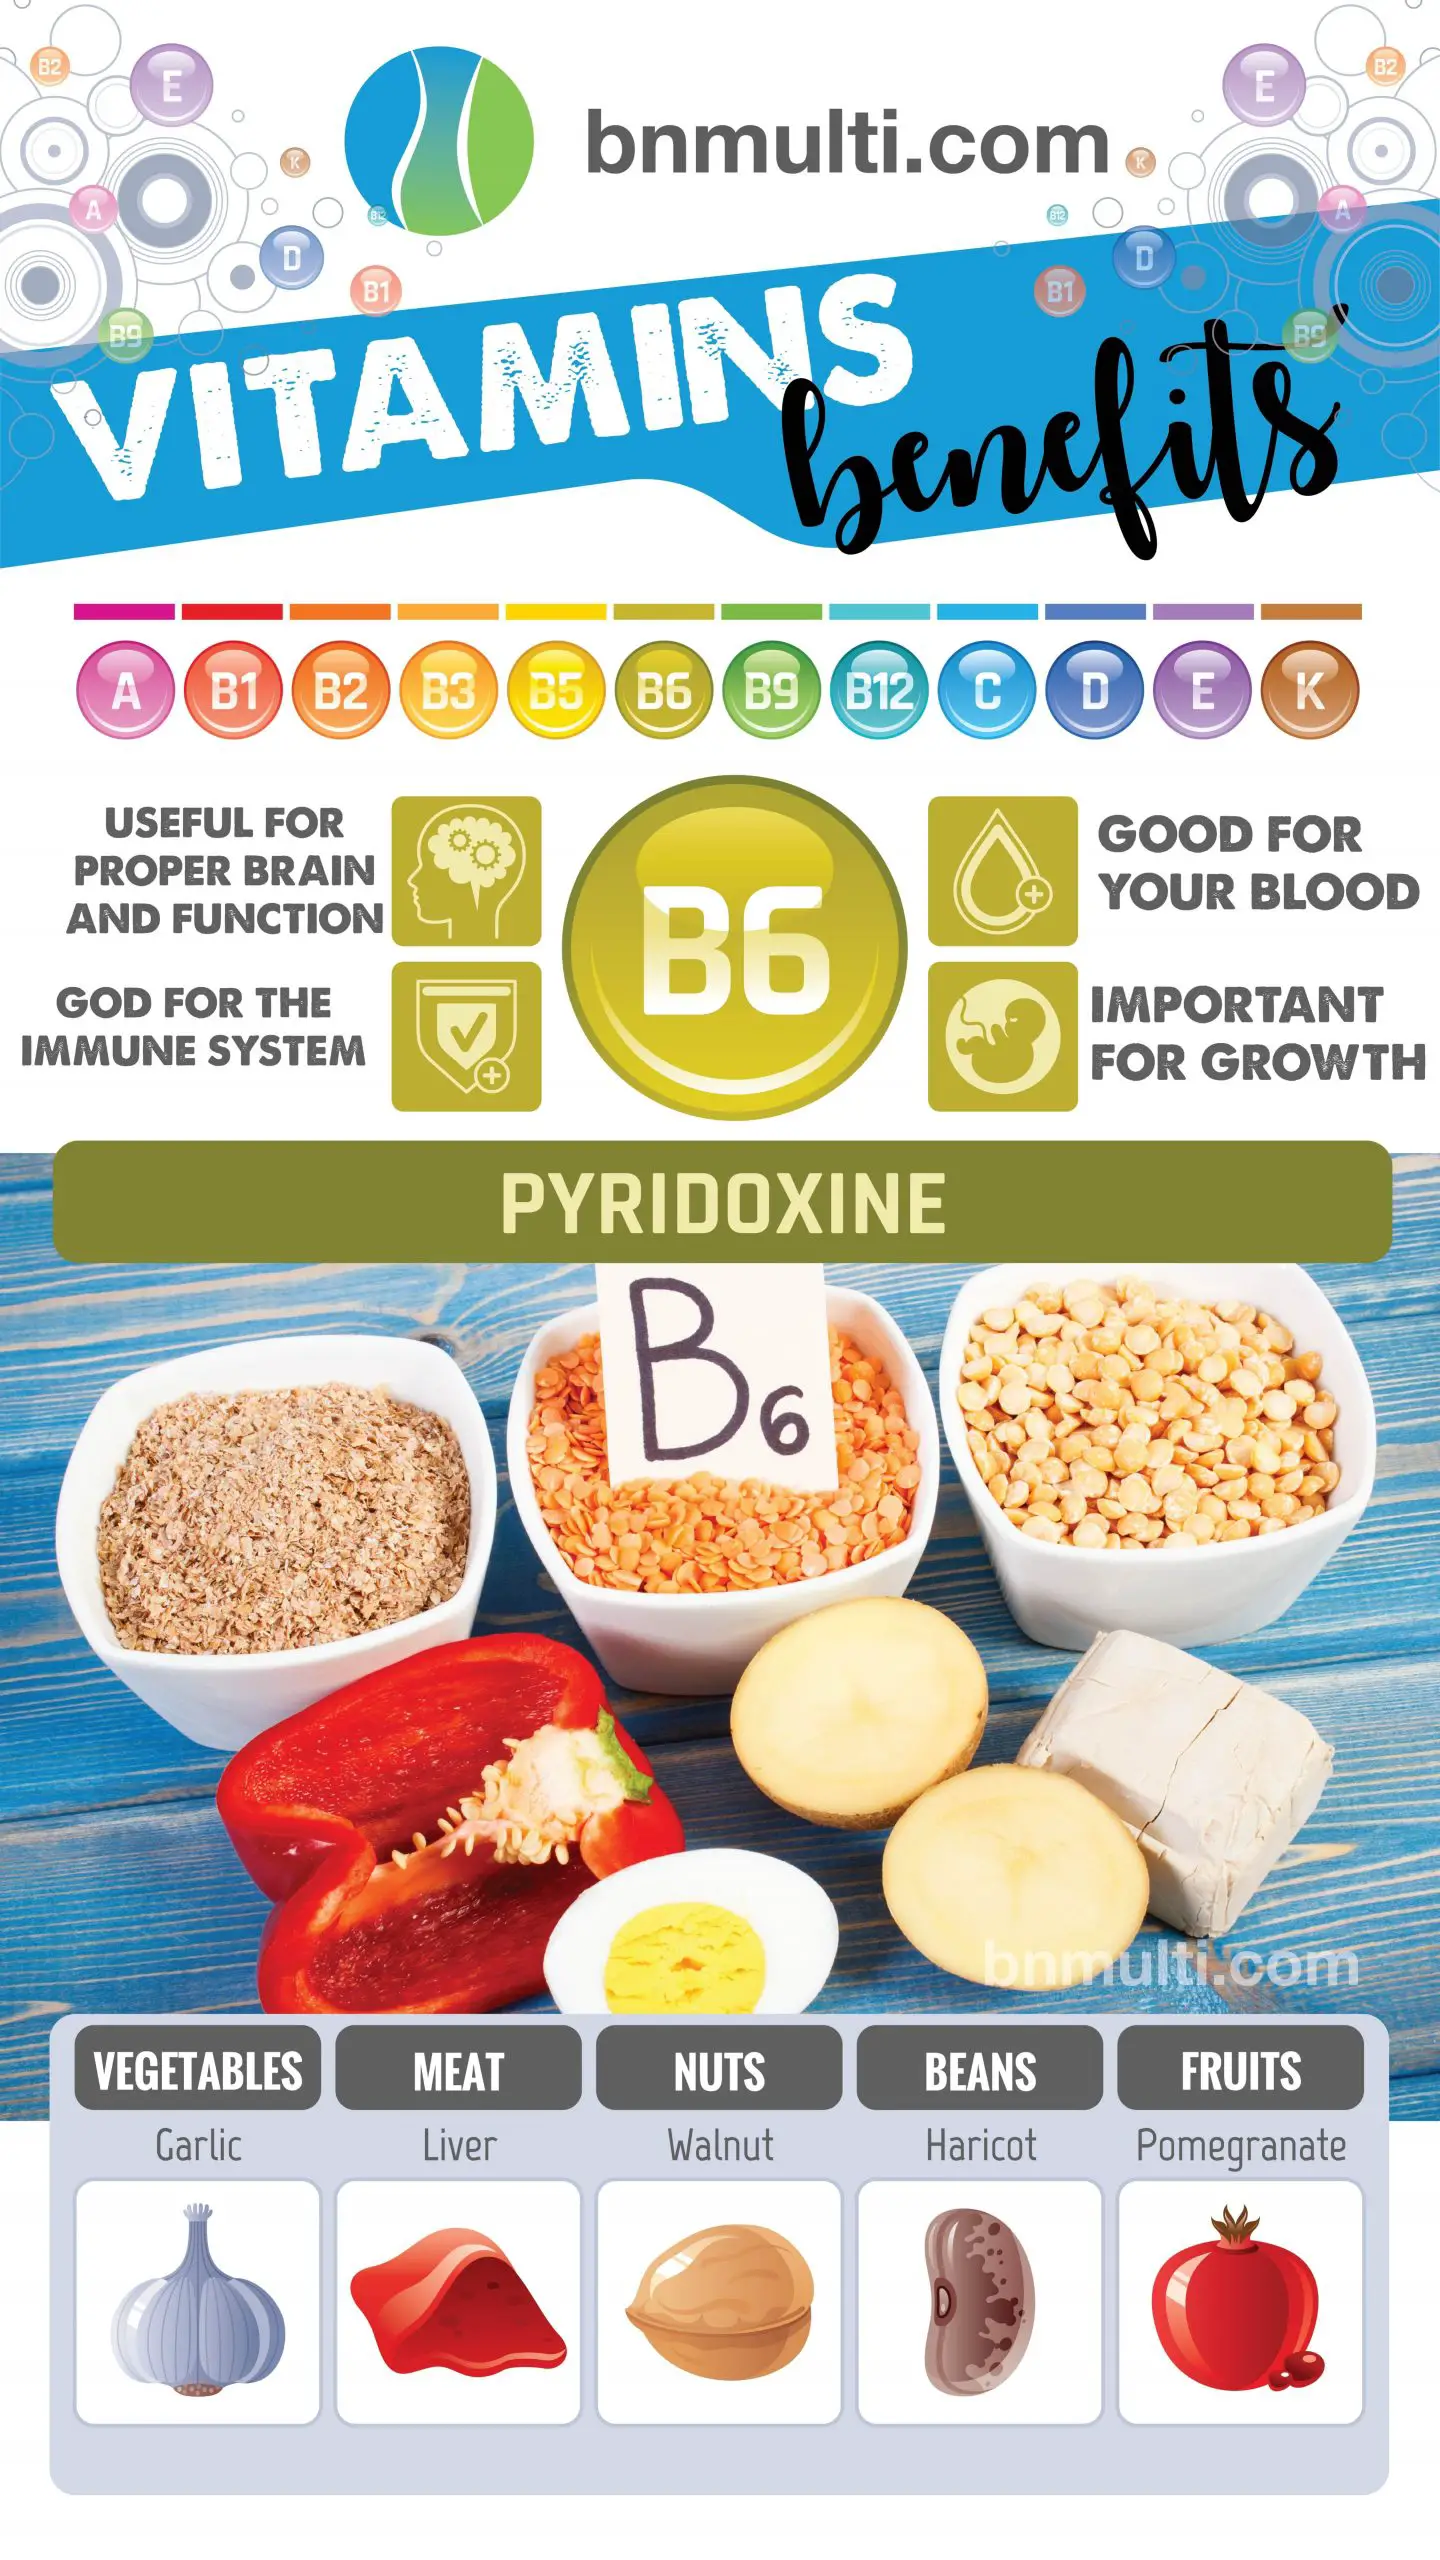 Vitamine: What Does Vitamin B6 Do For Your Body